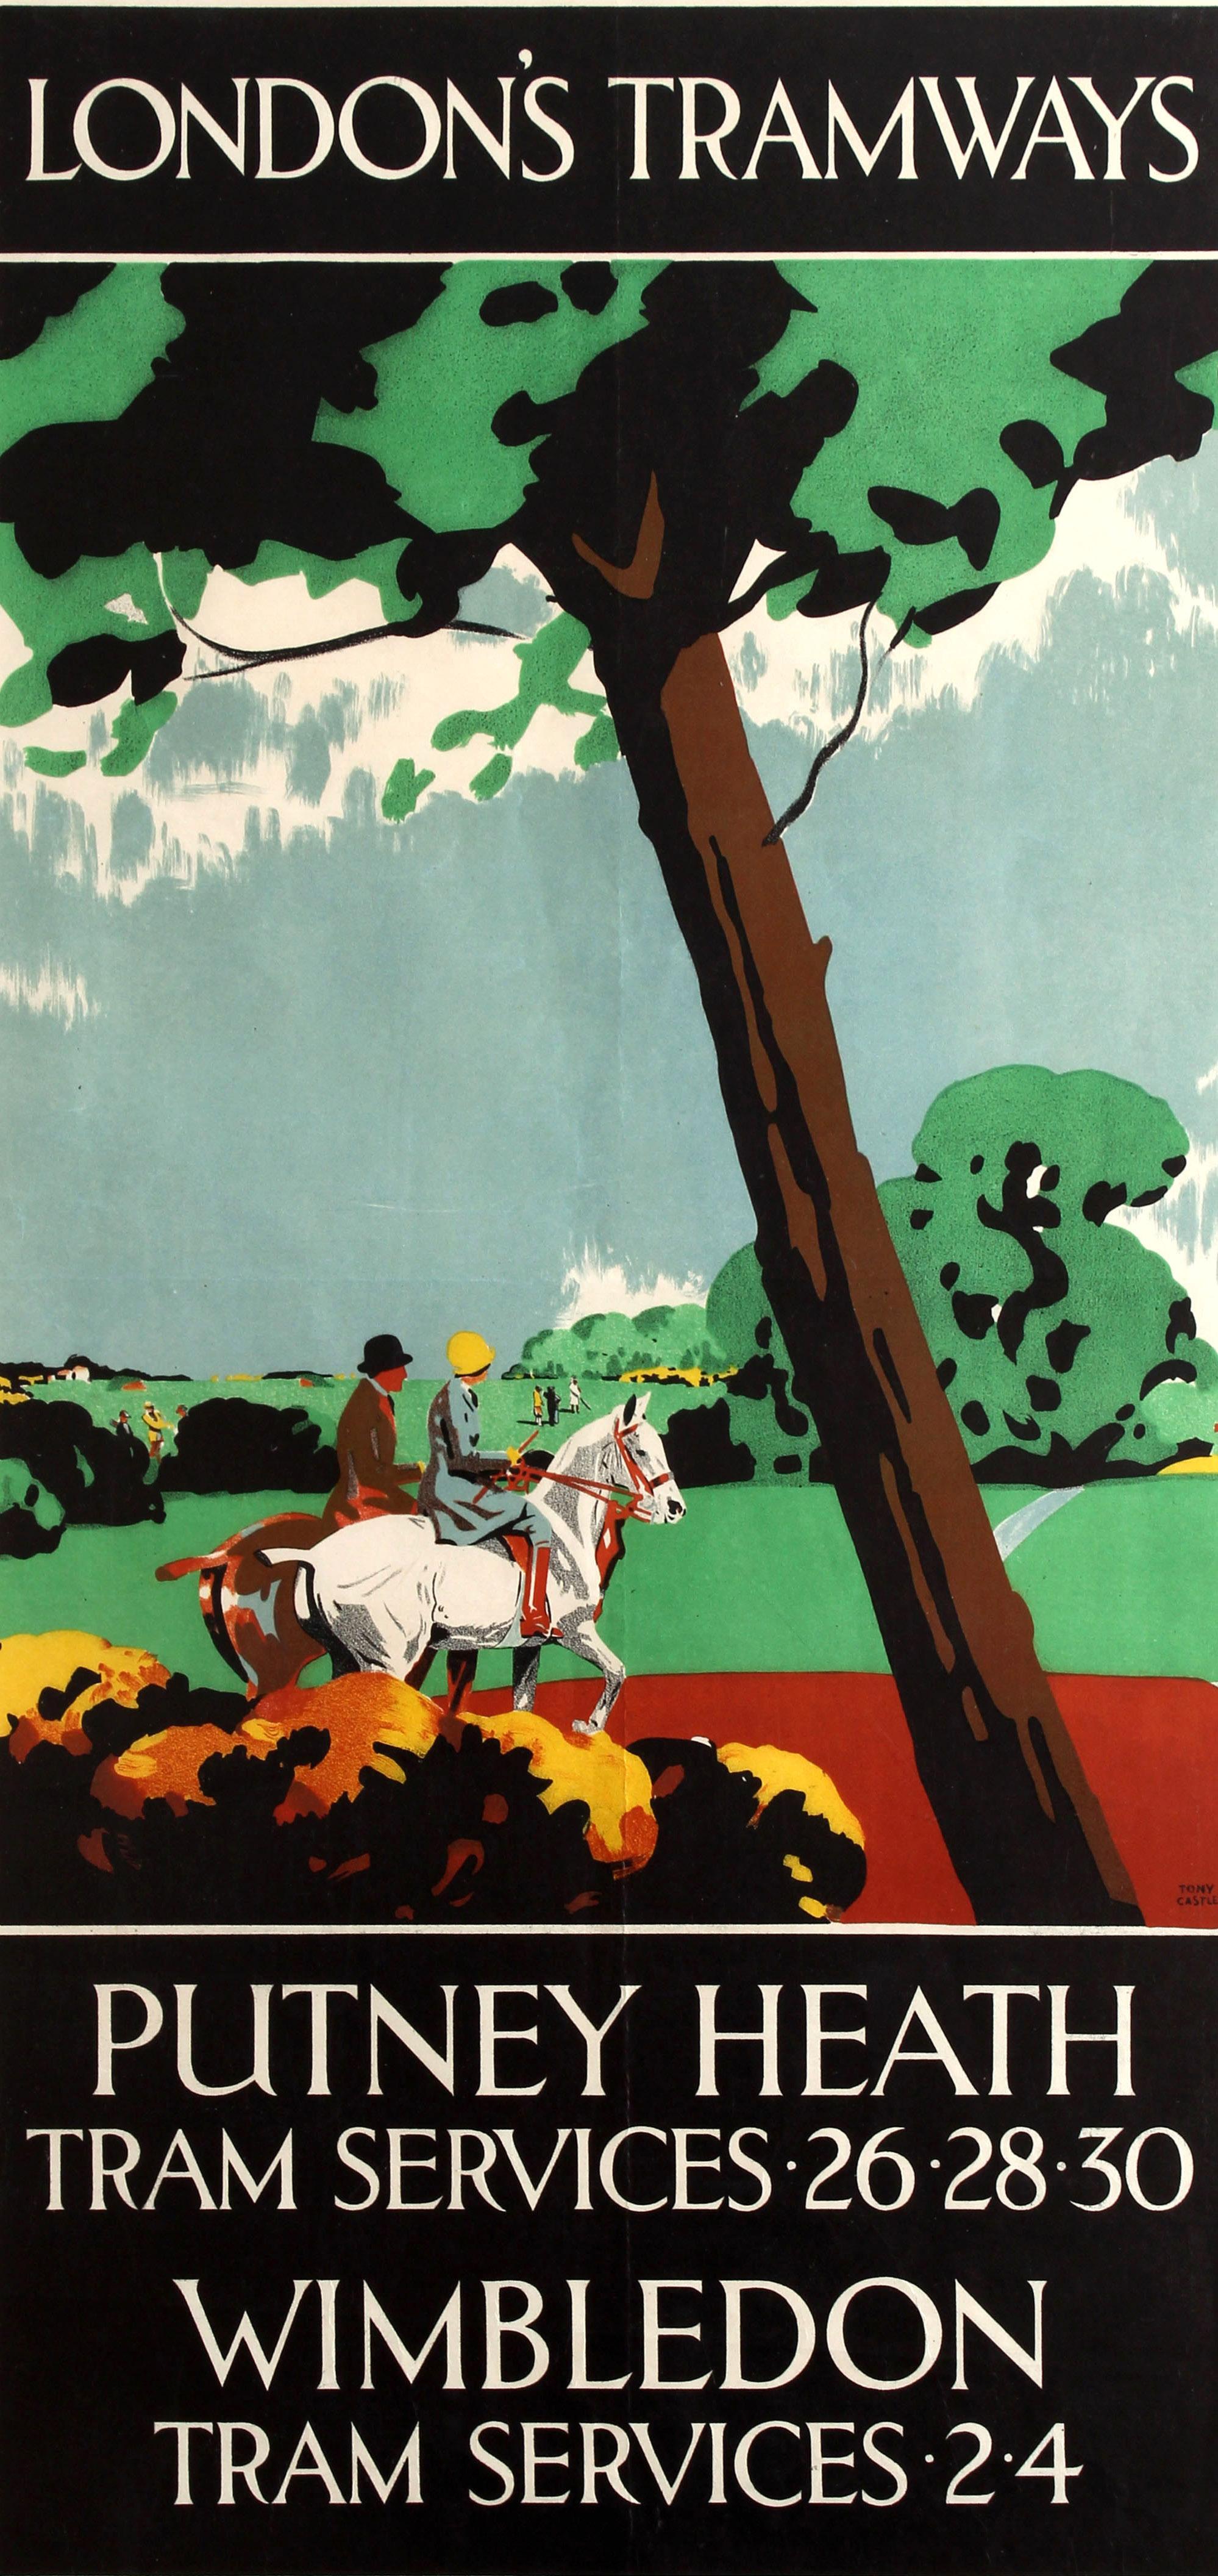 Original vintage travel advertising poster published by London County Council for London's Tramways Putney Heath and Wimbledon services. Great Art Deco style artwork by Tony Castle (1891-1971) featuring a man and lady riding horses on the heath, a